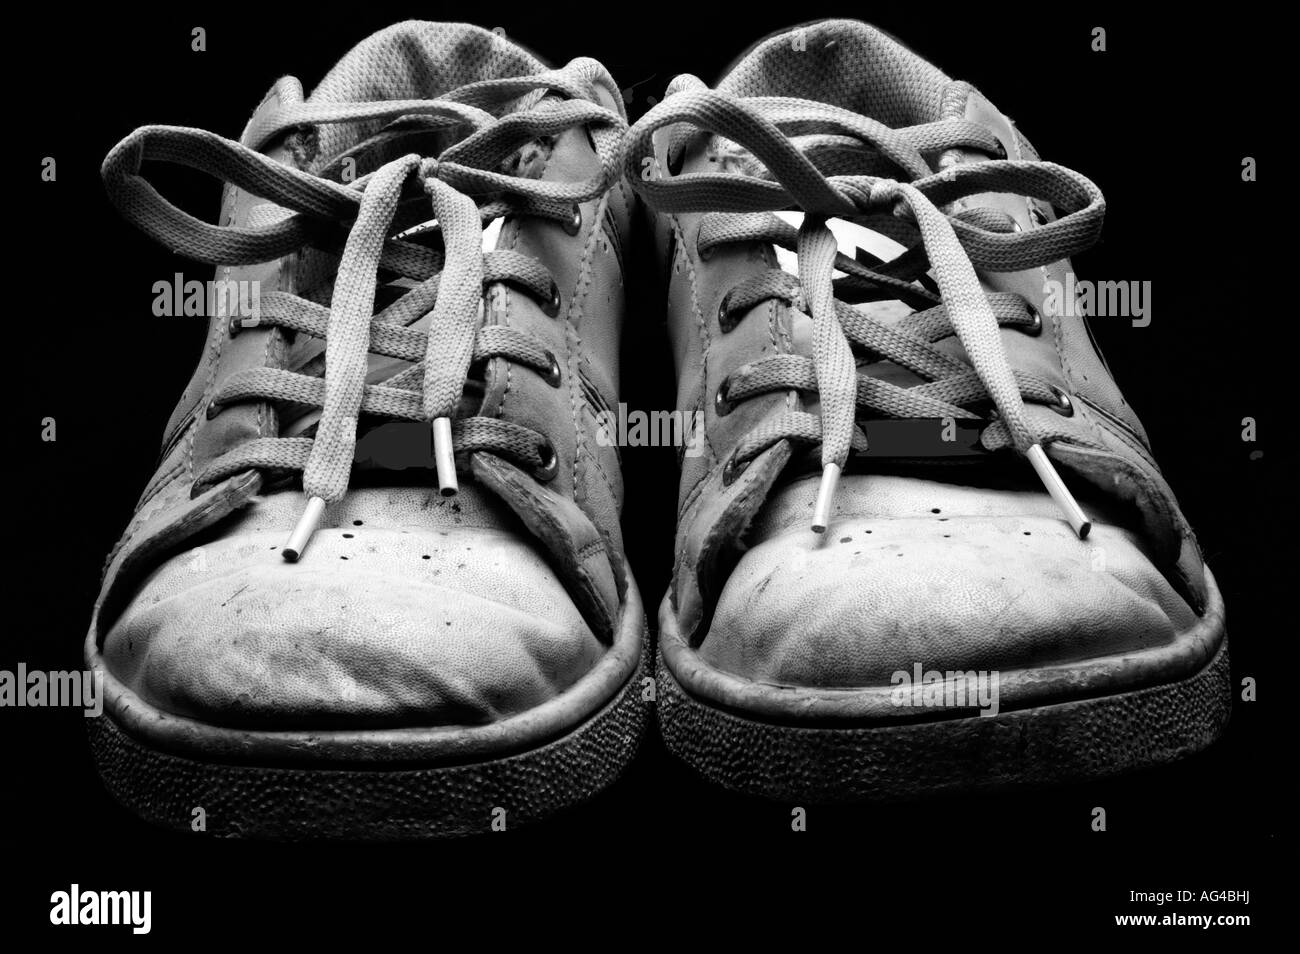 Dirty shoes Black and White Stock Photos & Images - Alamy